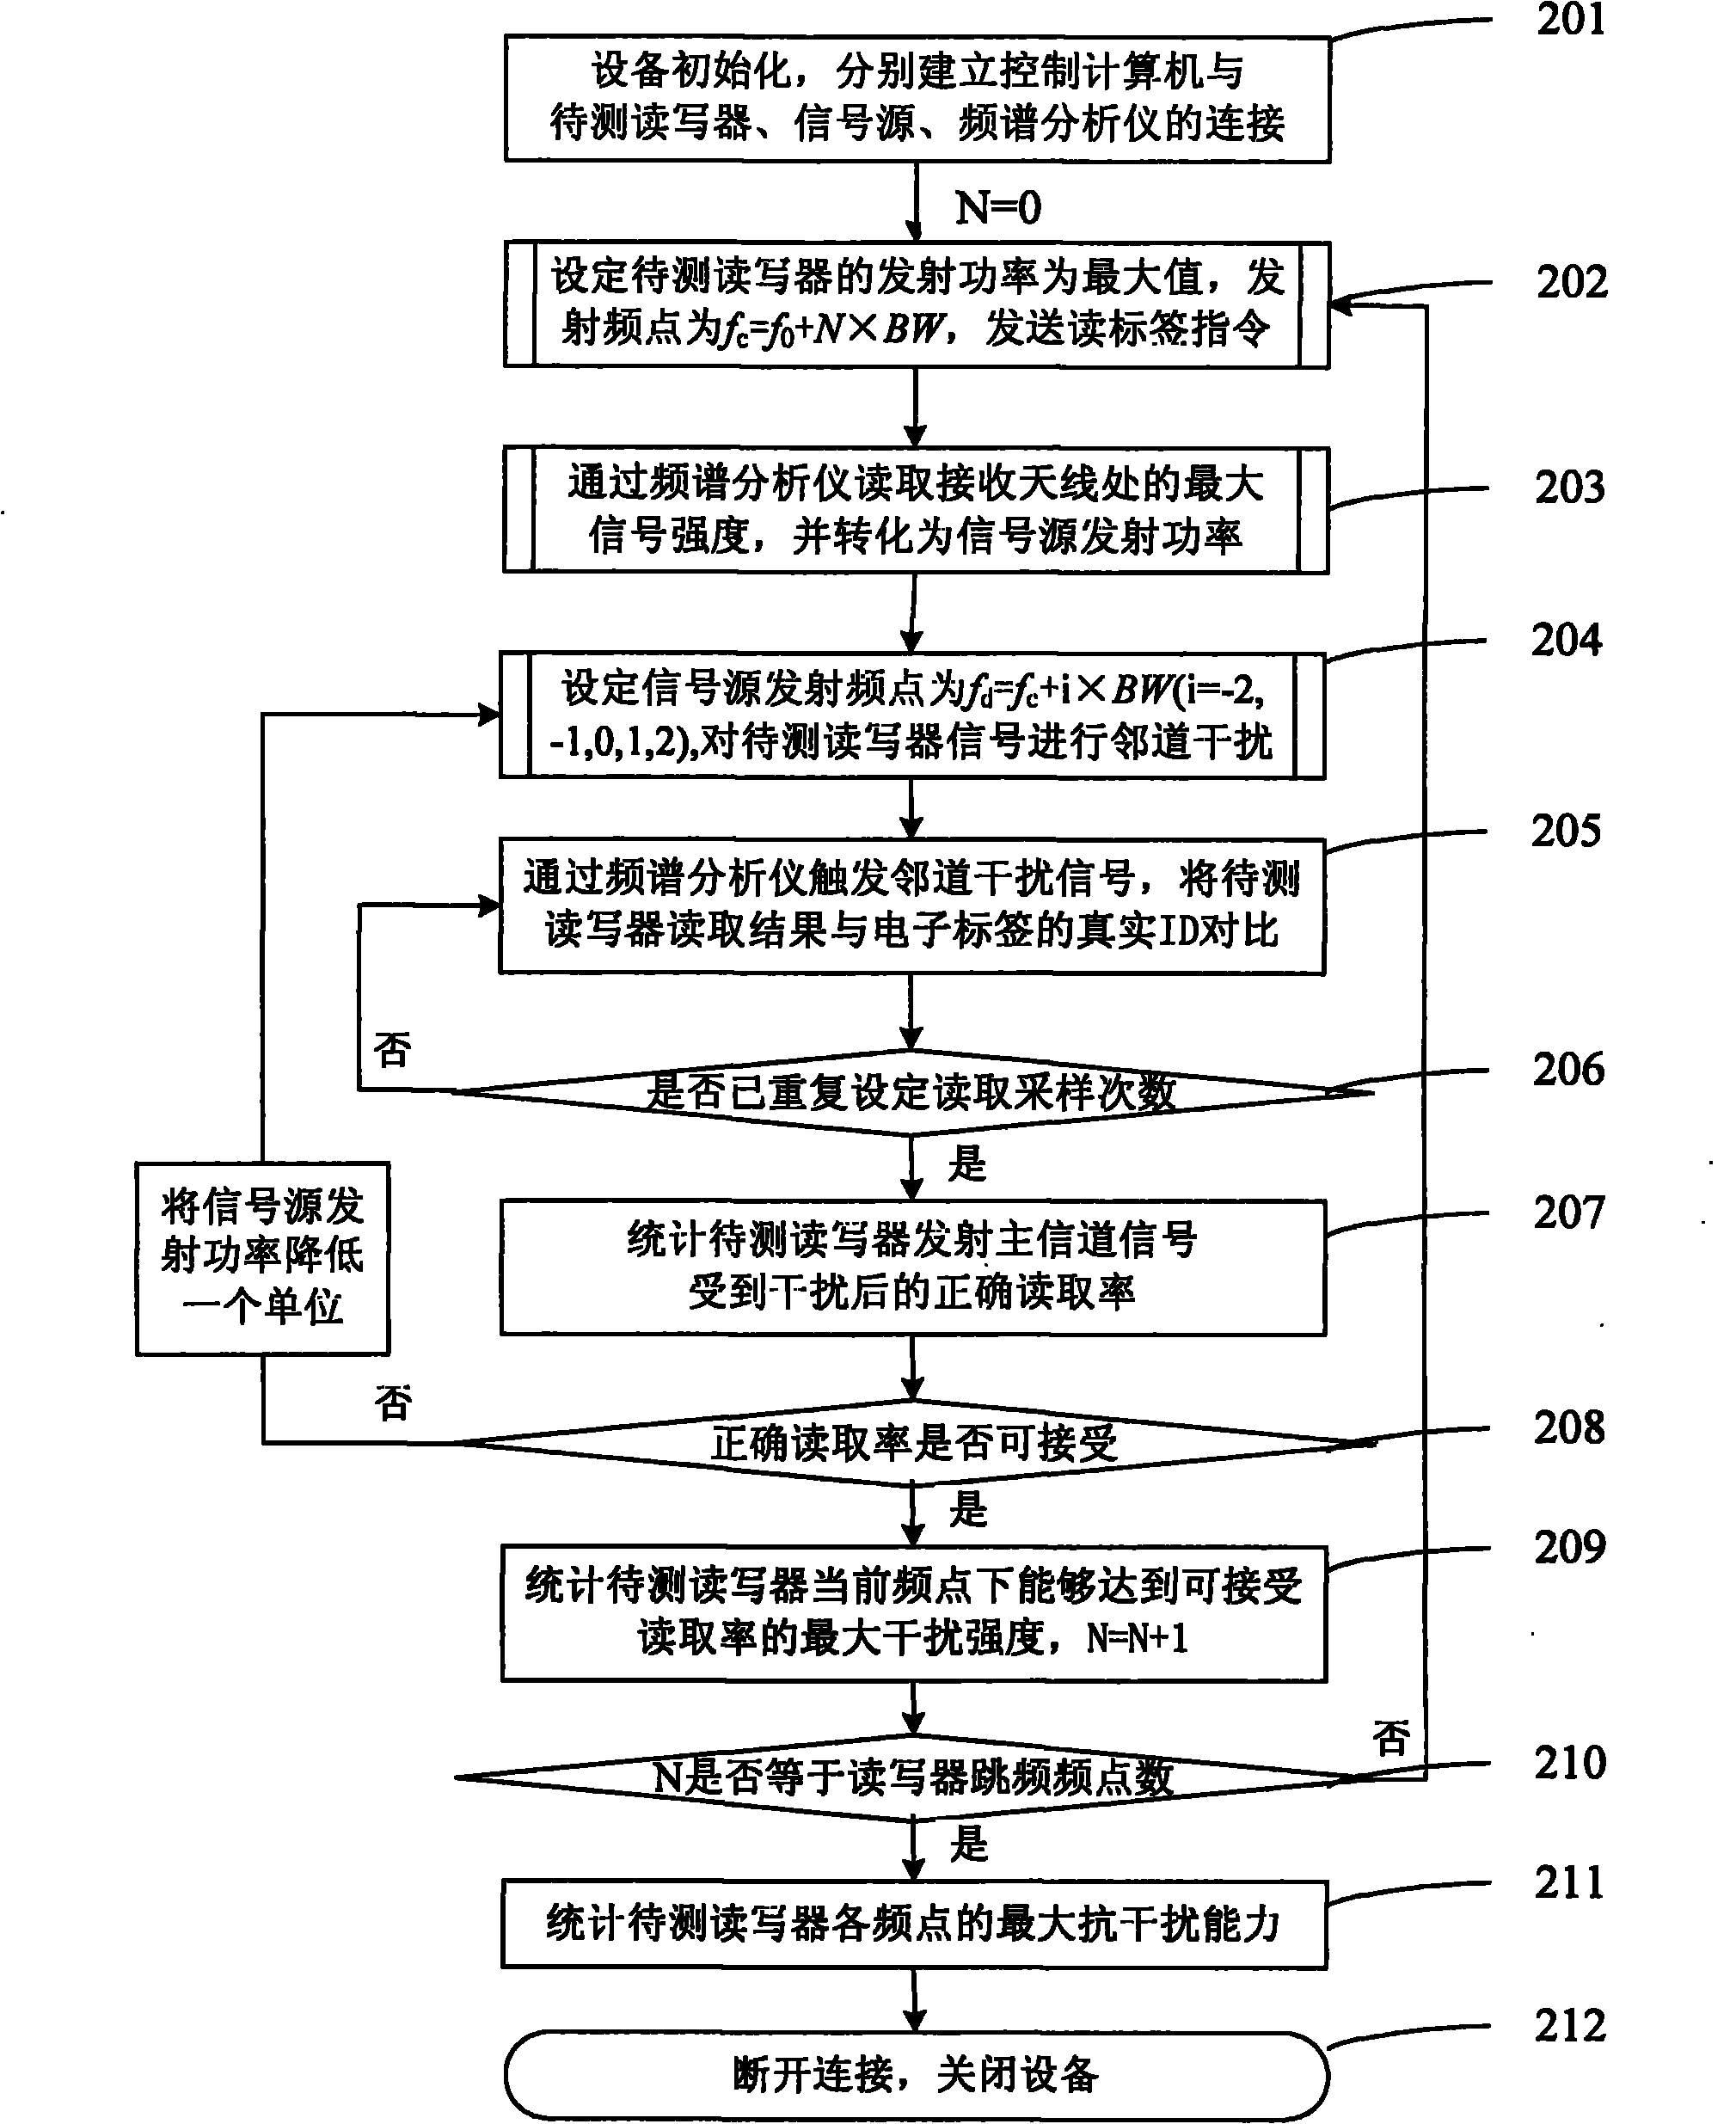 Benchmark test system and method for adjacent channel interference resisting capacity of RFID reader-writer